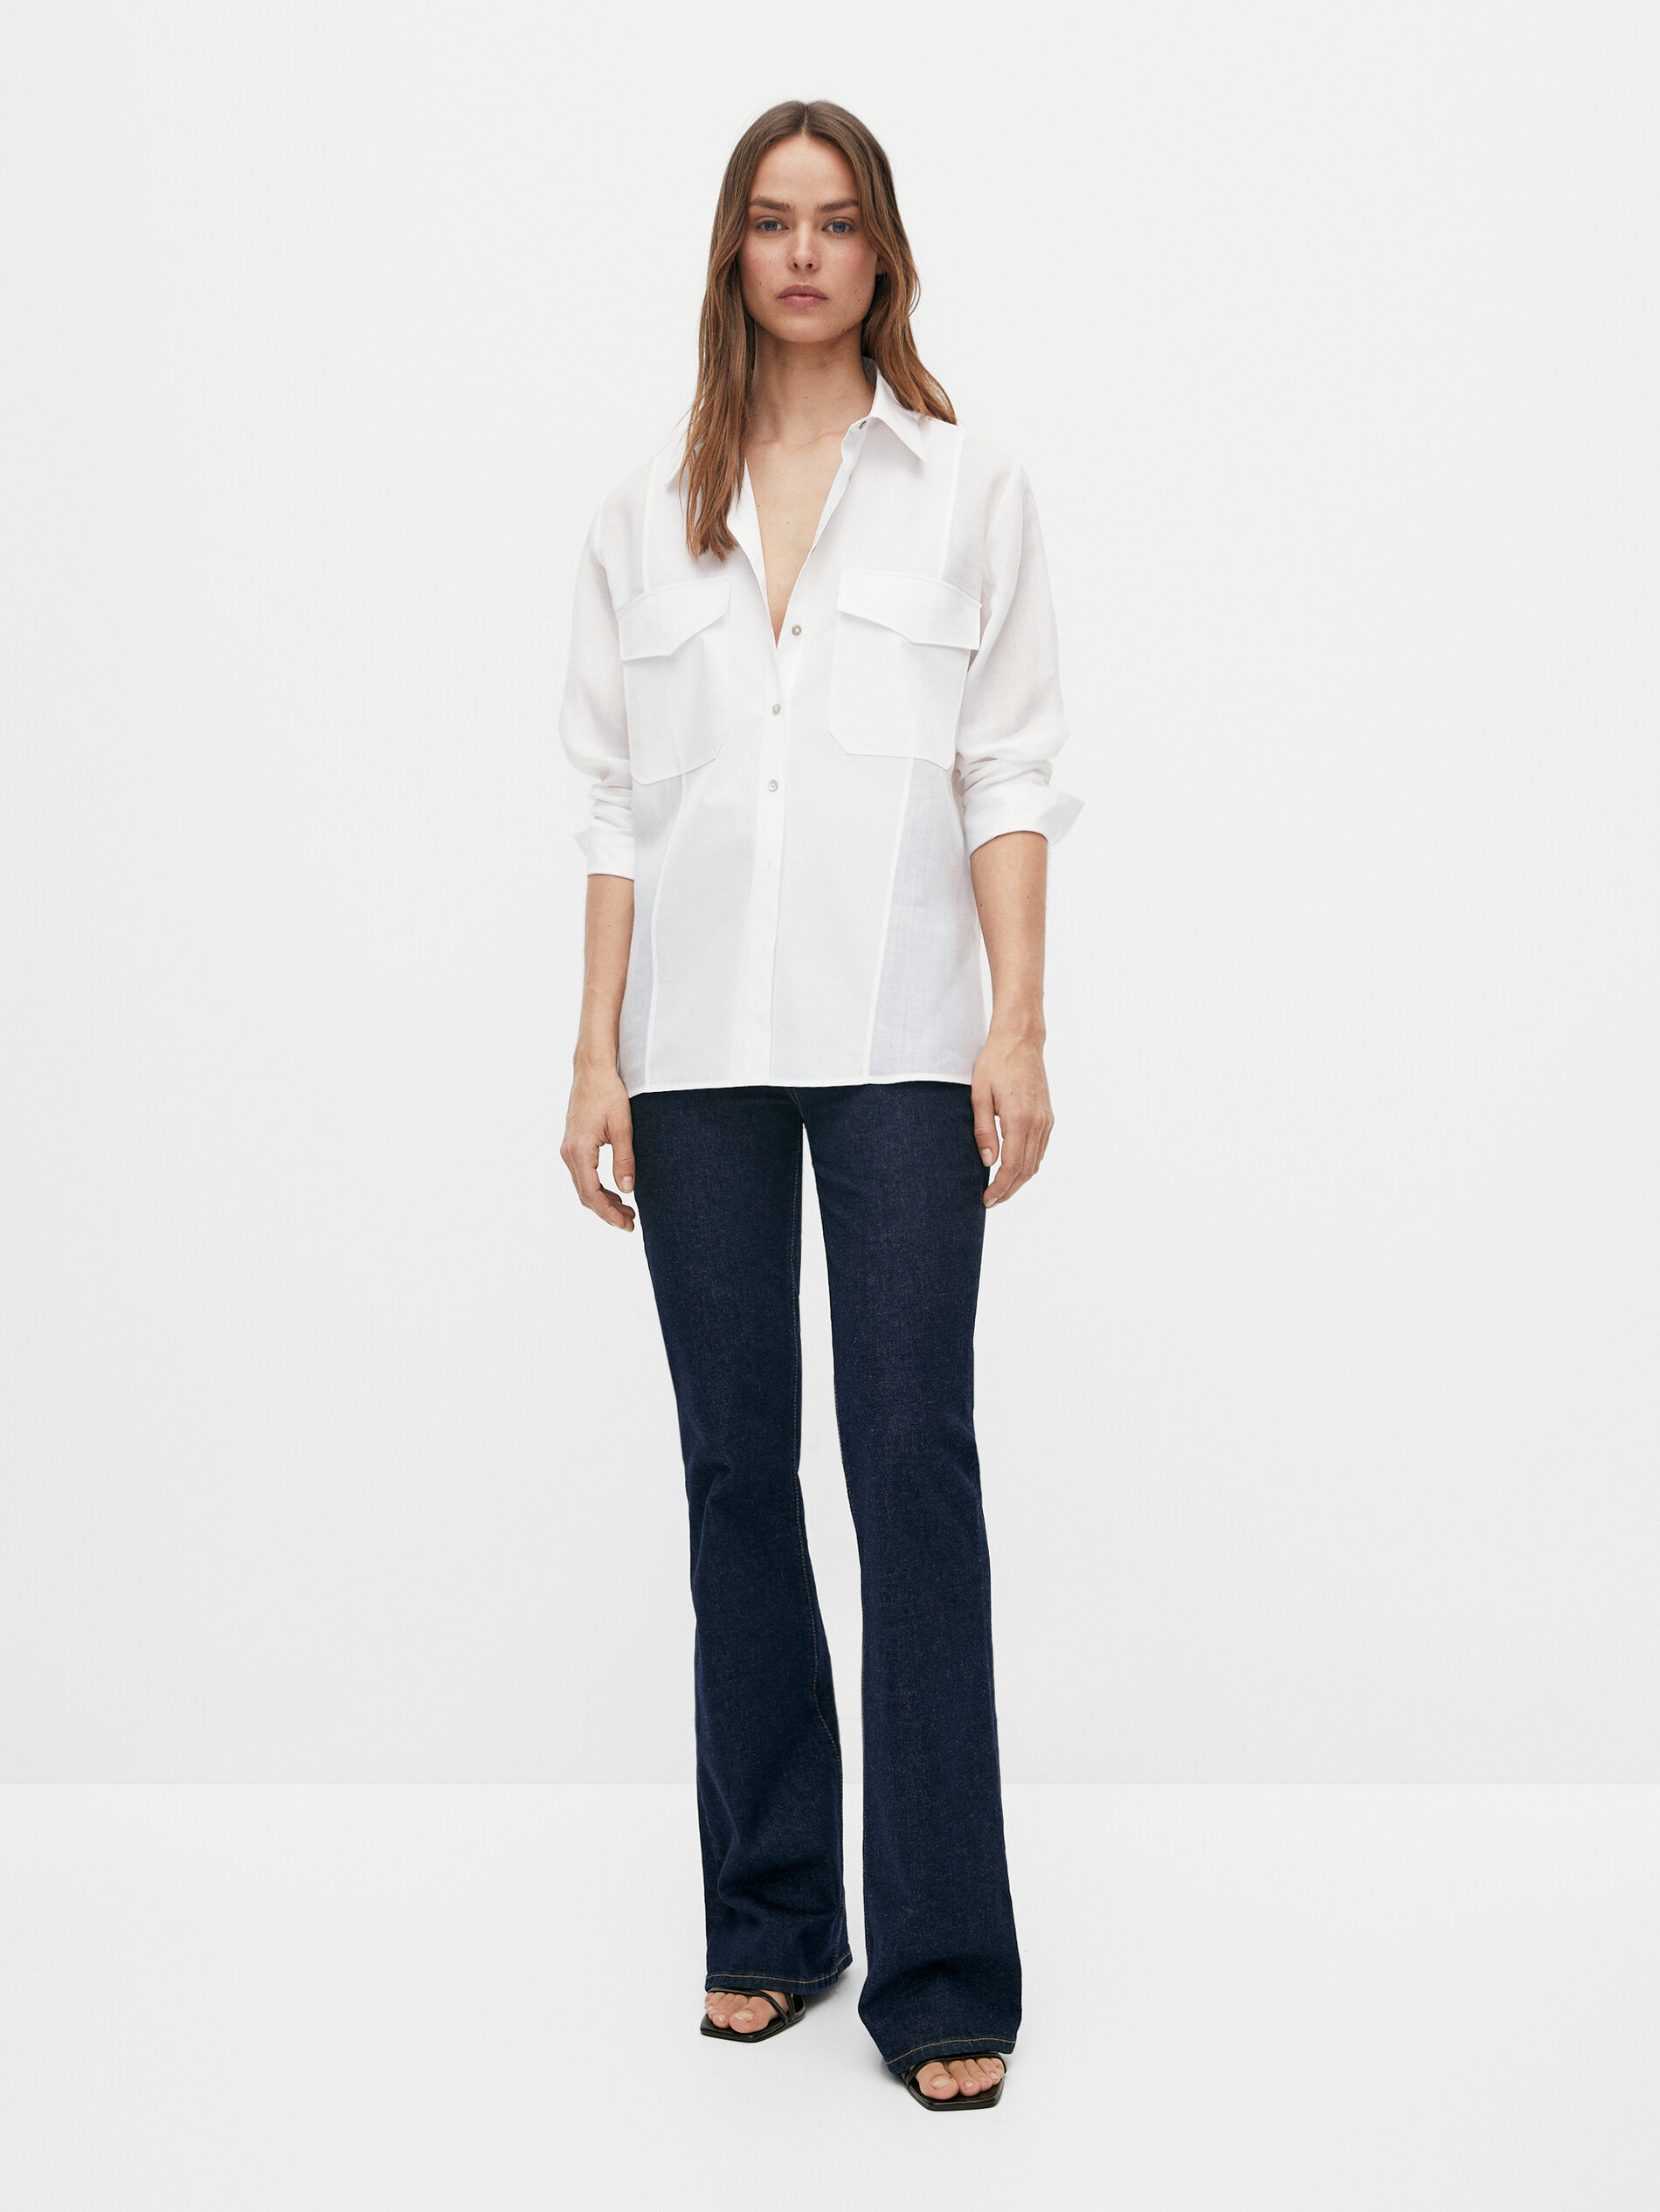 Ramie cotton shirt with pockets